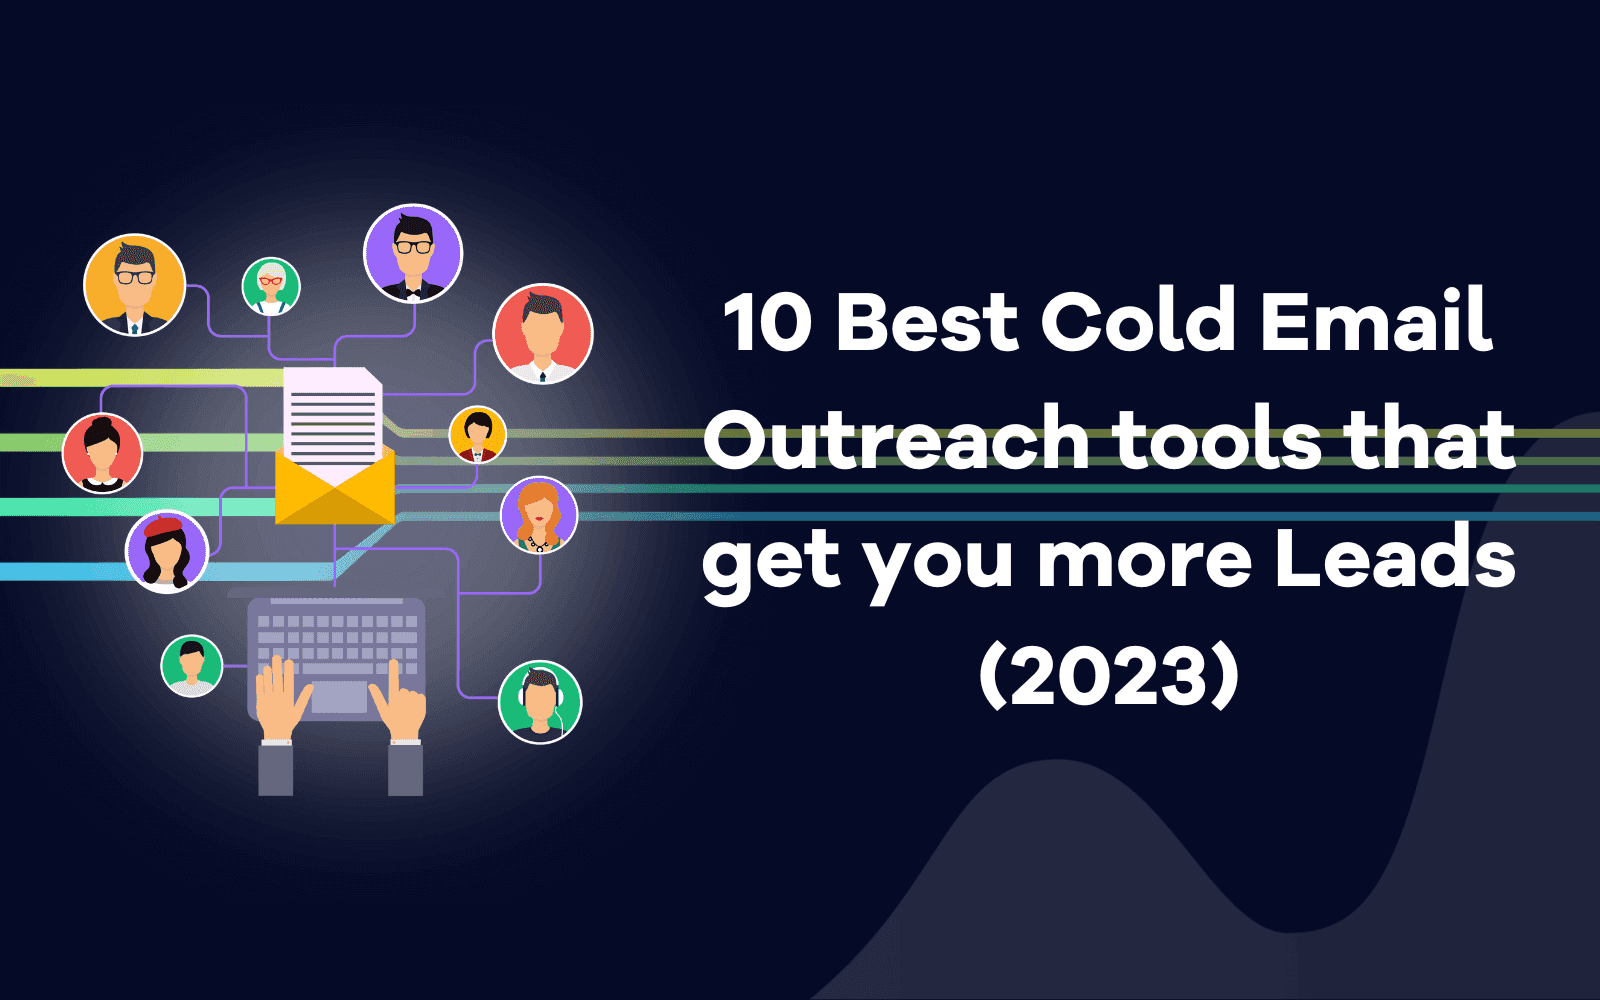 10 Best Cold Email Outreach tools that get you more Leads (2023) (1).png